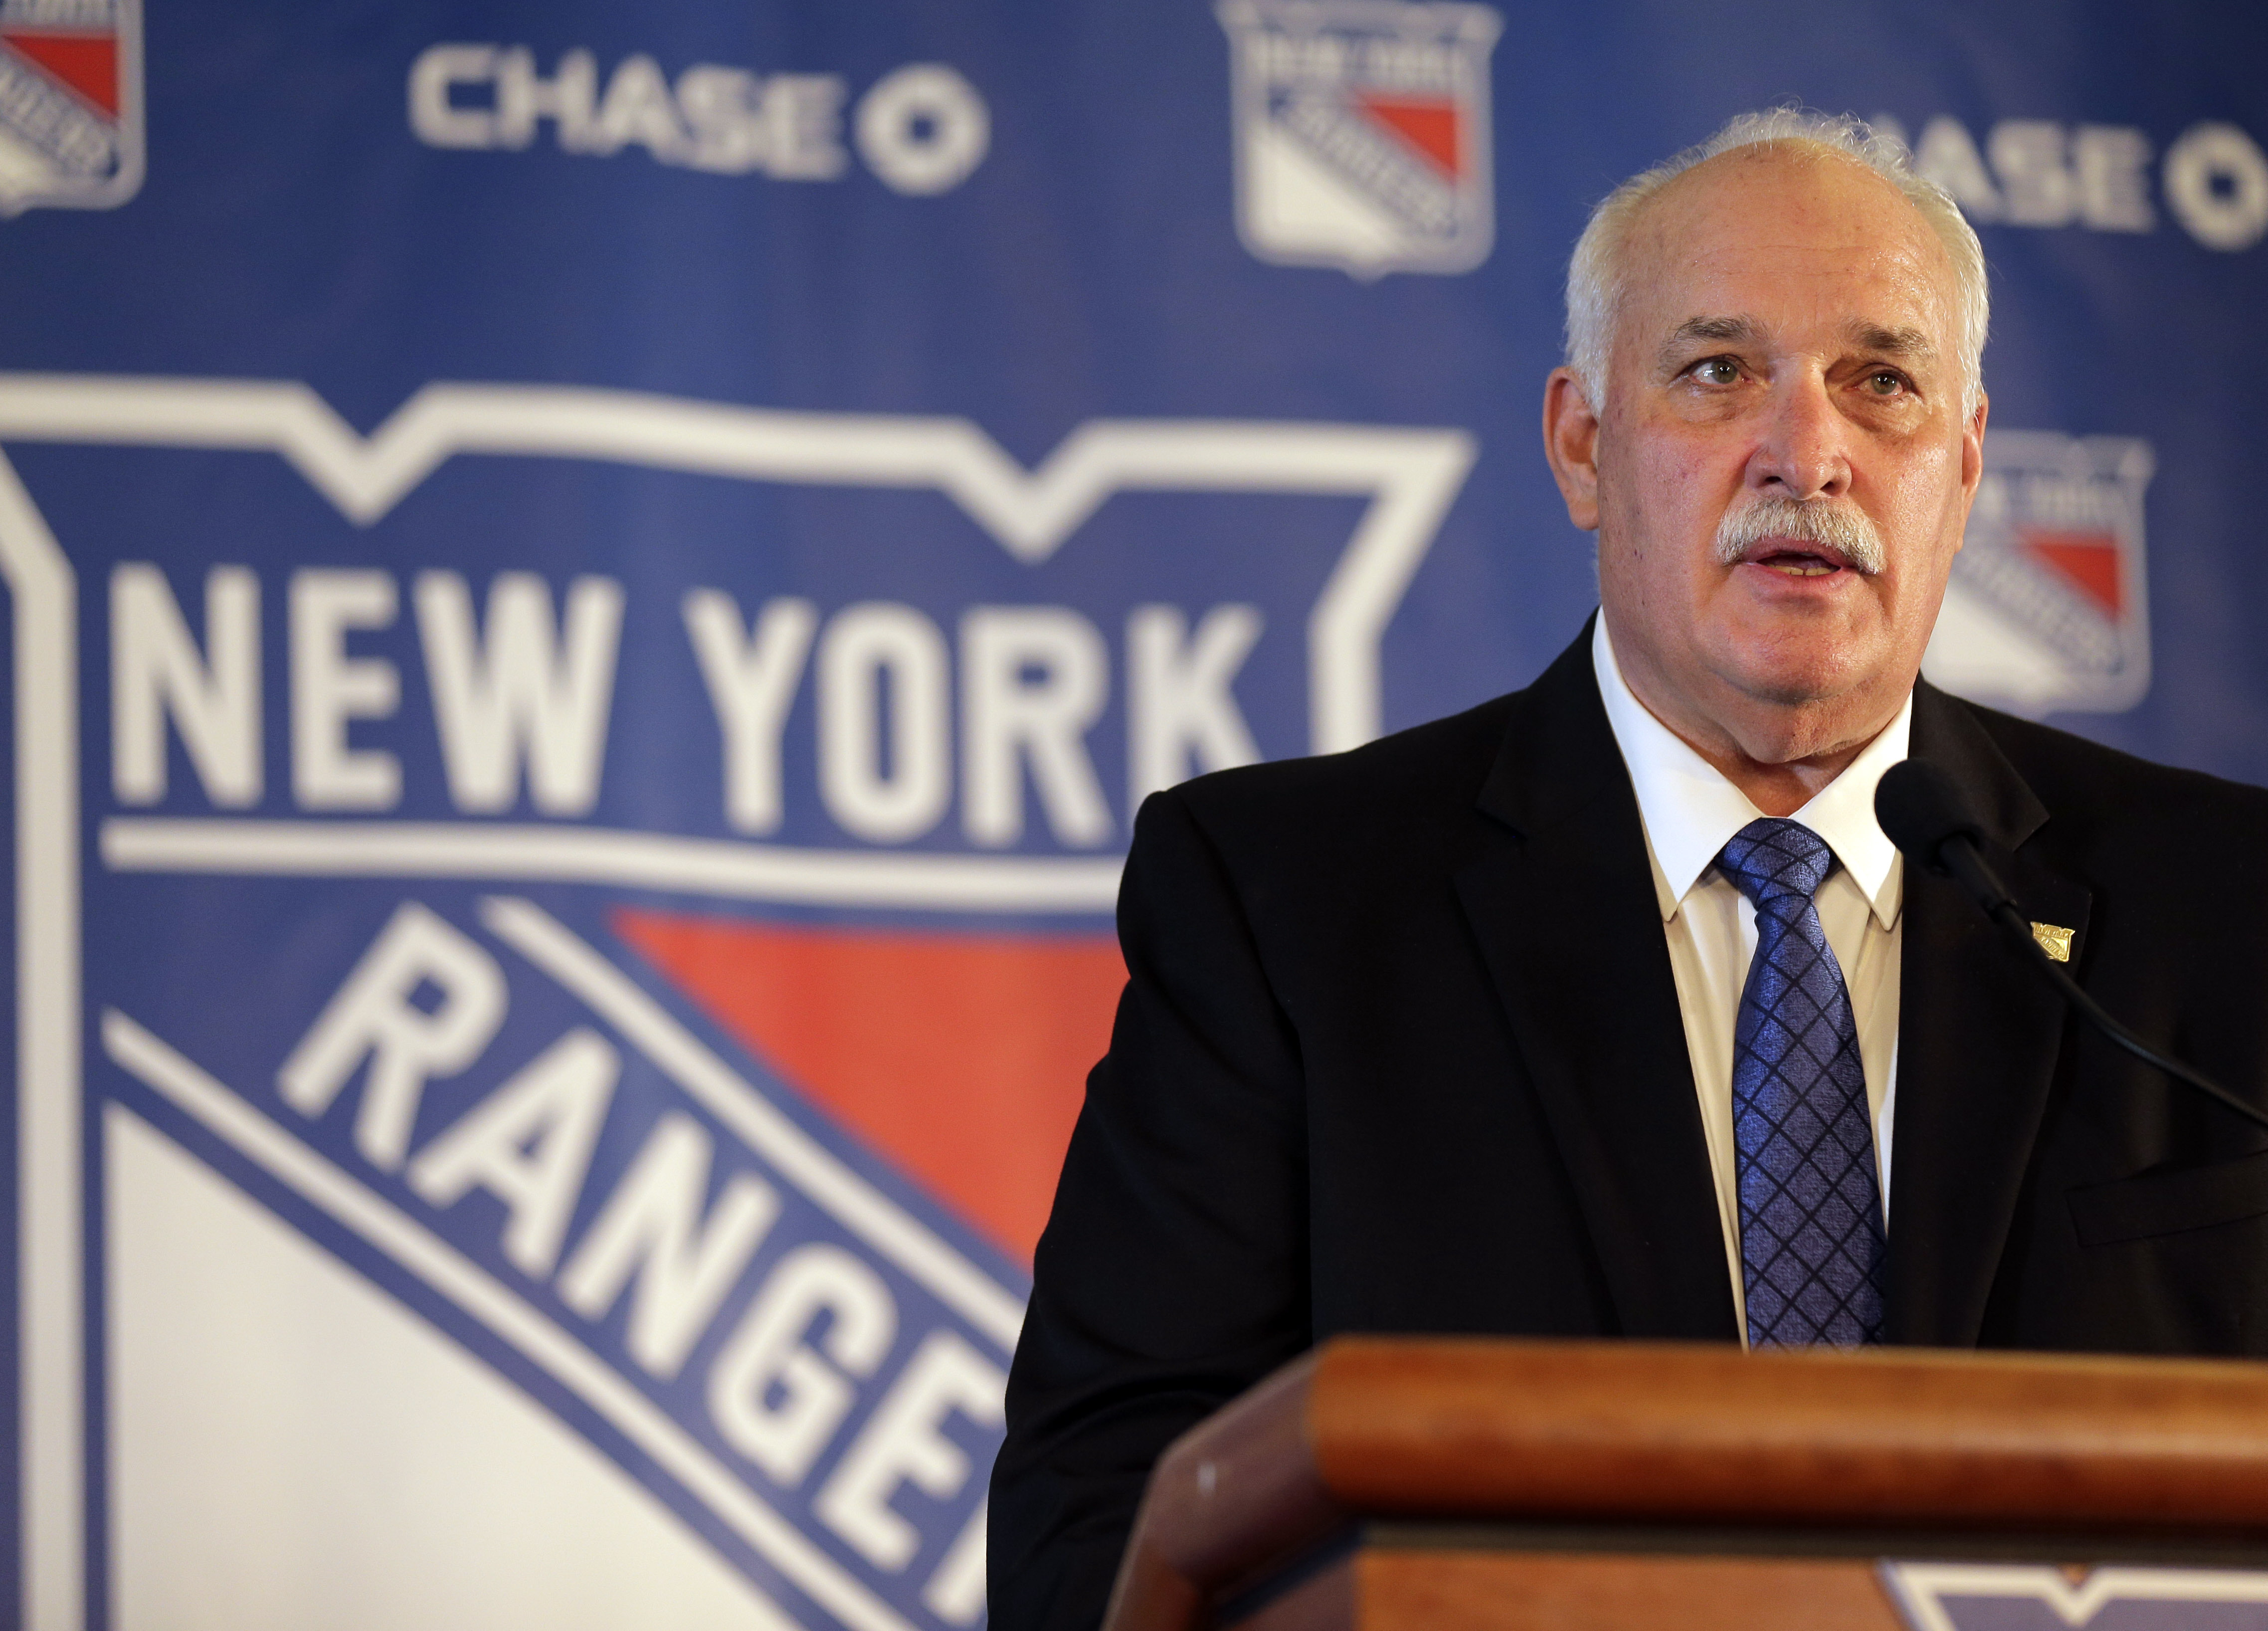 N.H.L. Draft: Rangers Select Alexis Lafreniere With First Overall Pick